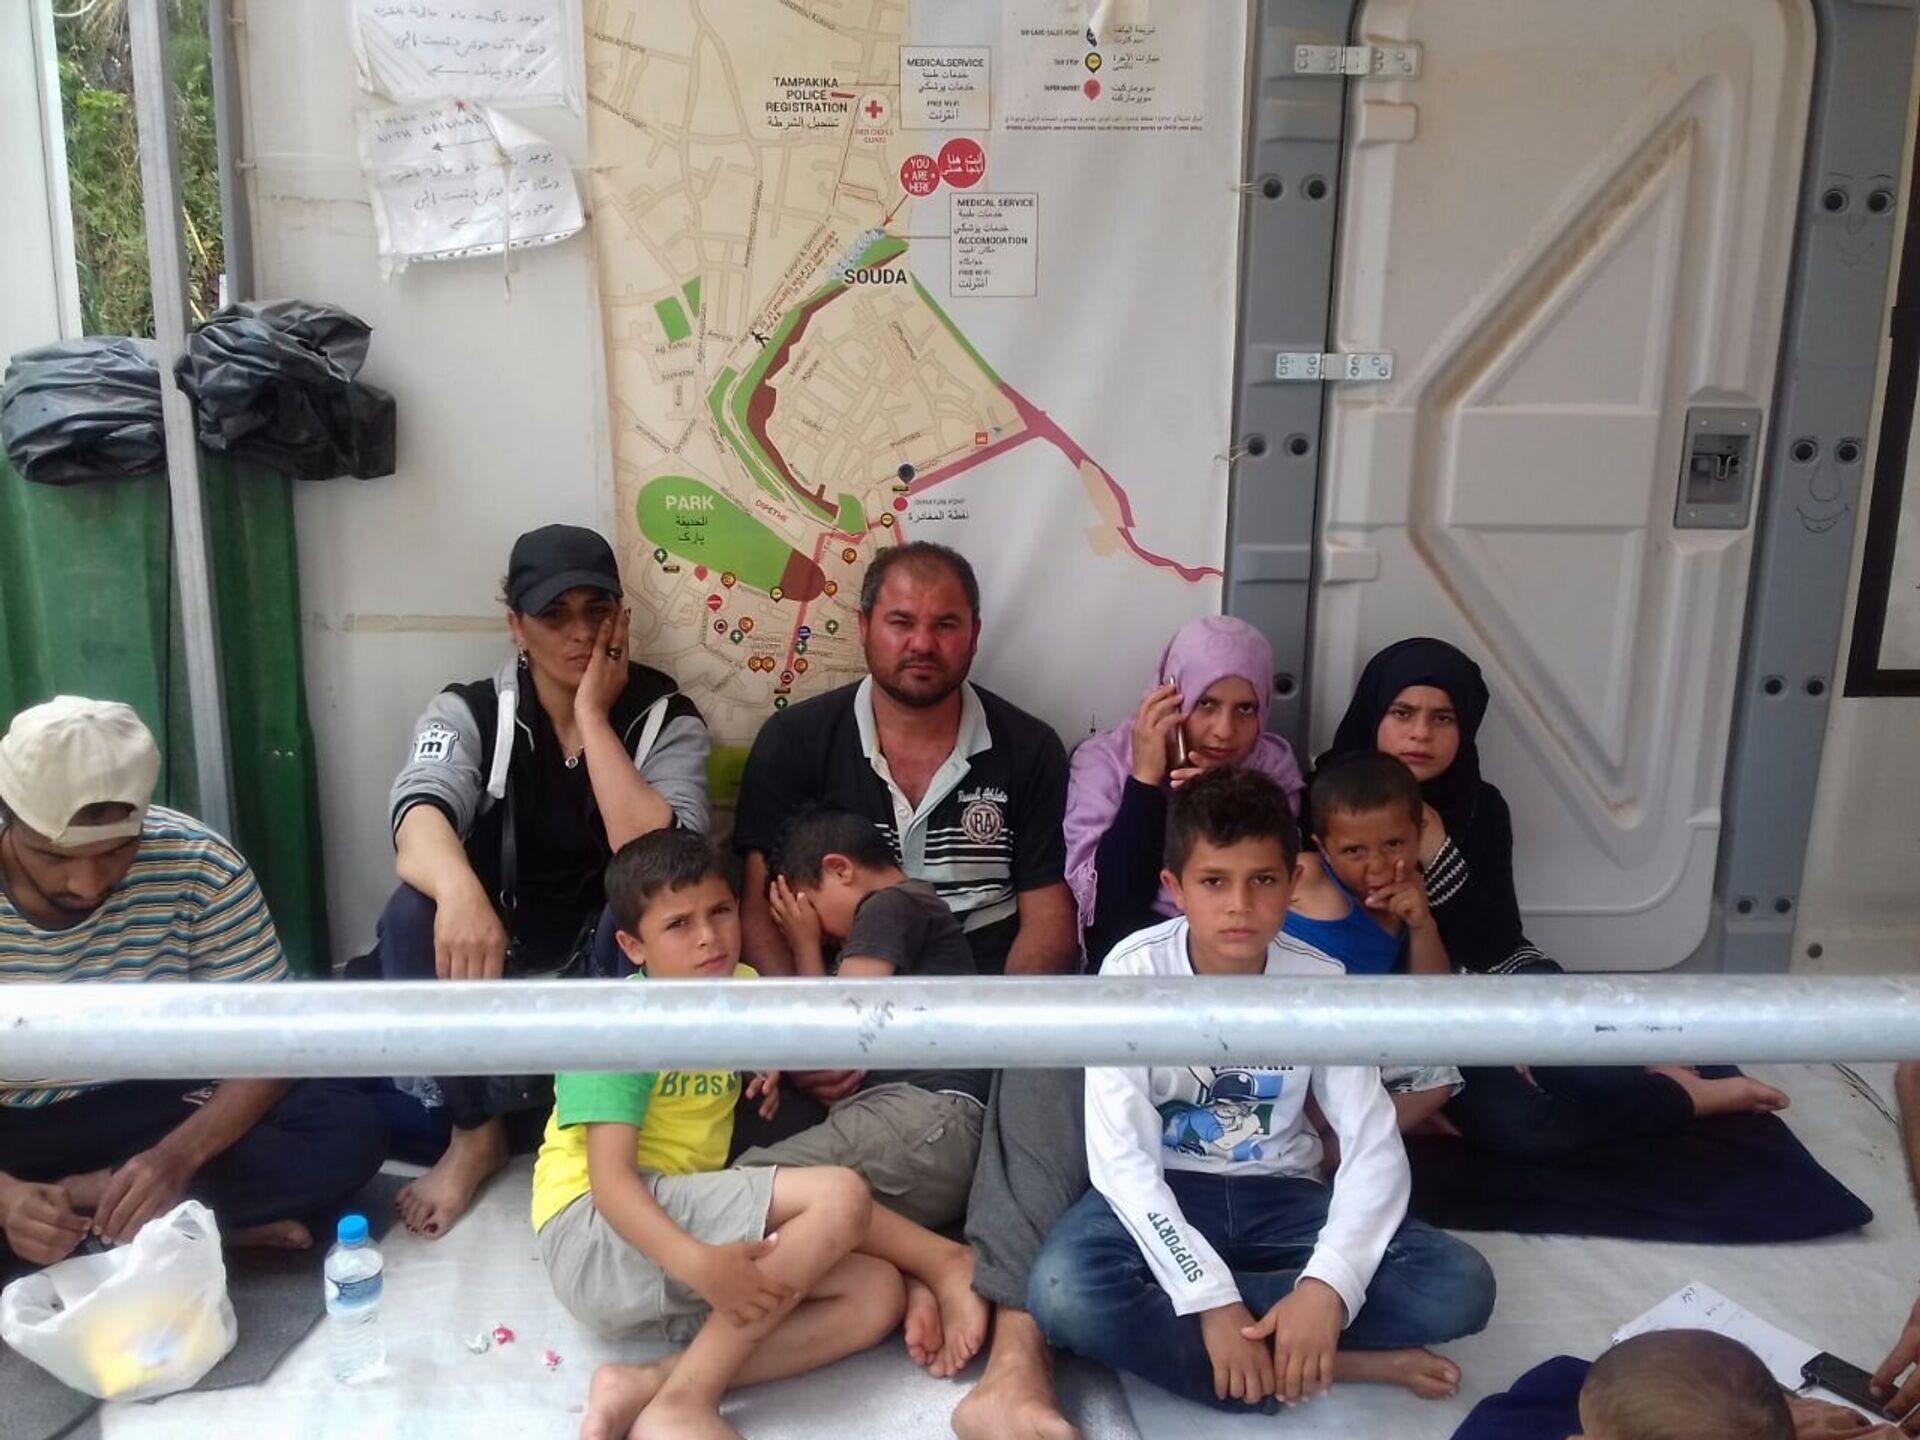 On 17th May, 28 Syrian & Palestinian refugees (adults) went on hunger strike in Chios, Greece. They demand asylum information and interviews for their applications. - Sputnik International, 1920, 31.05.2022